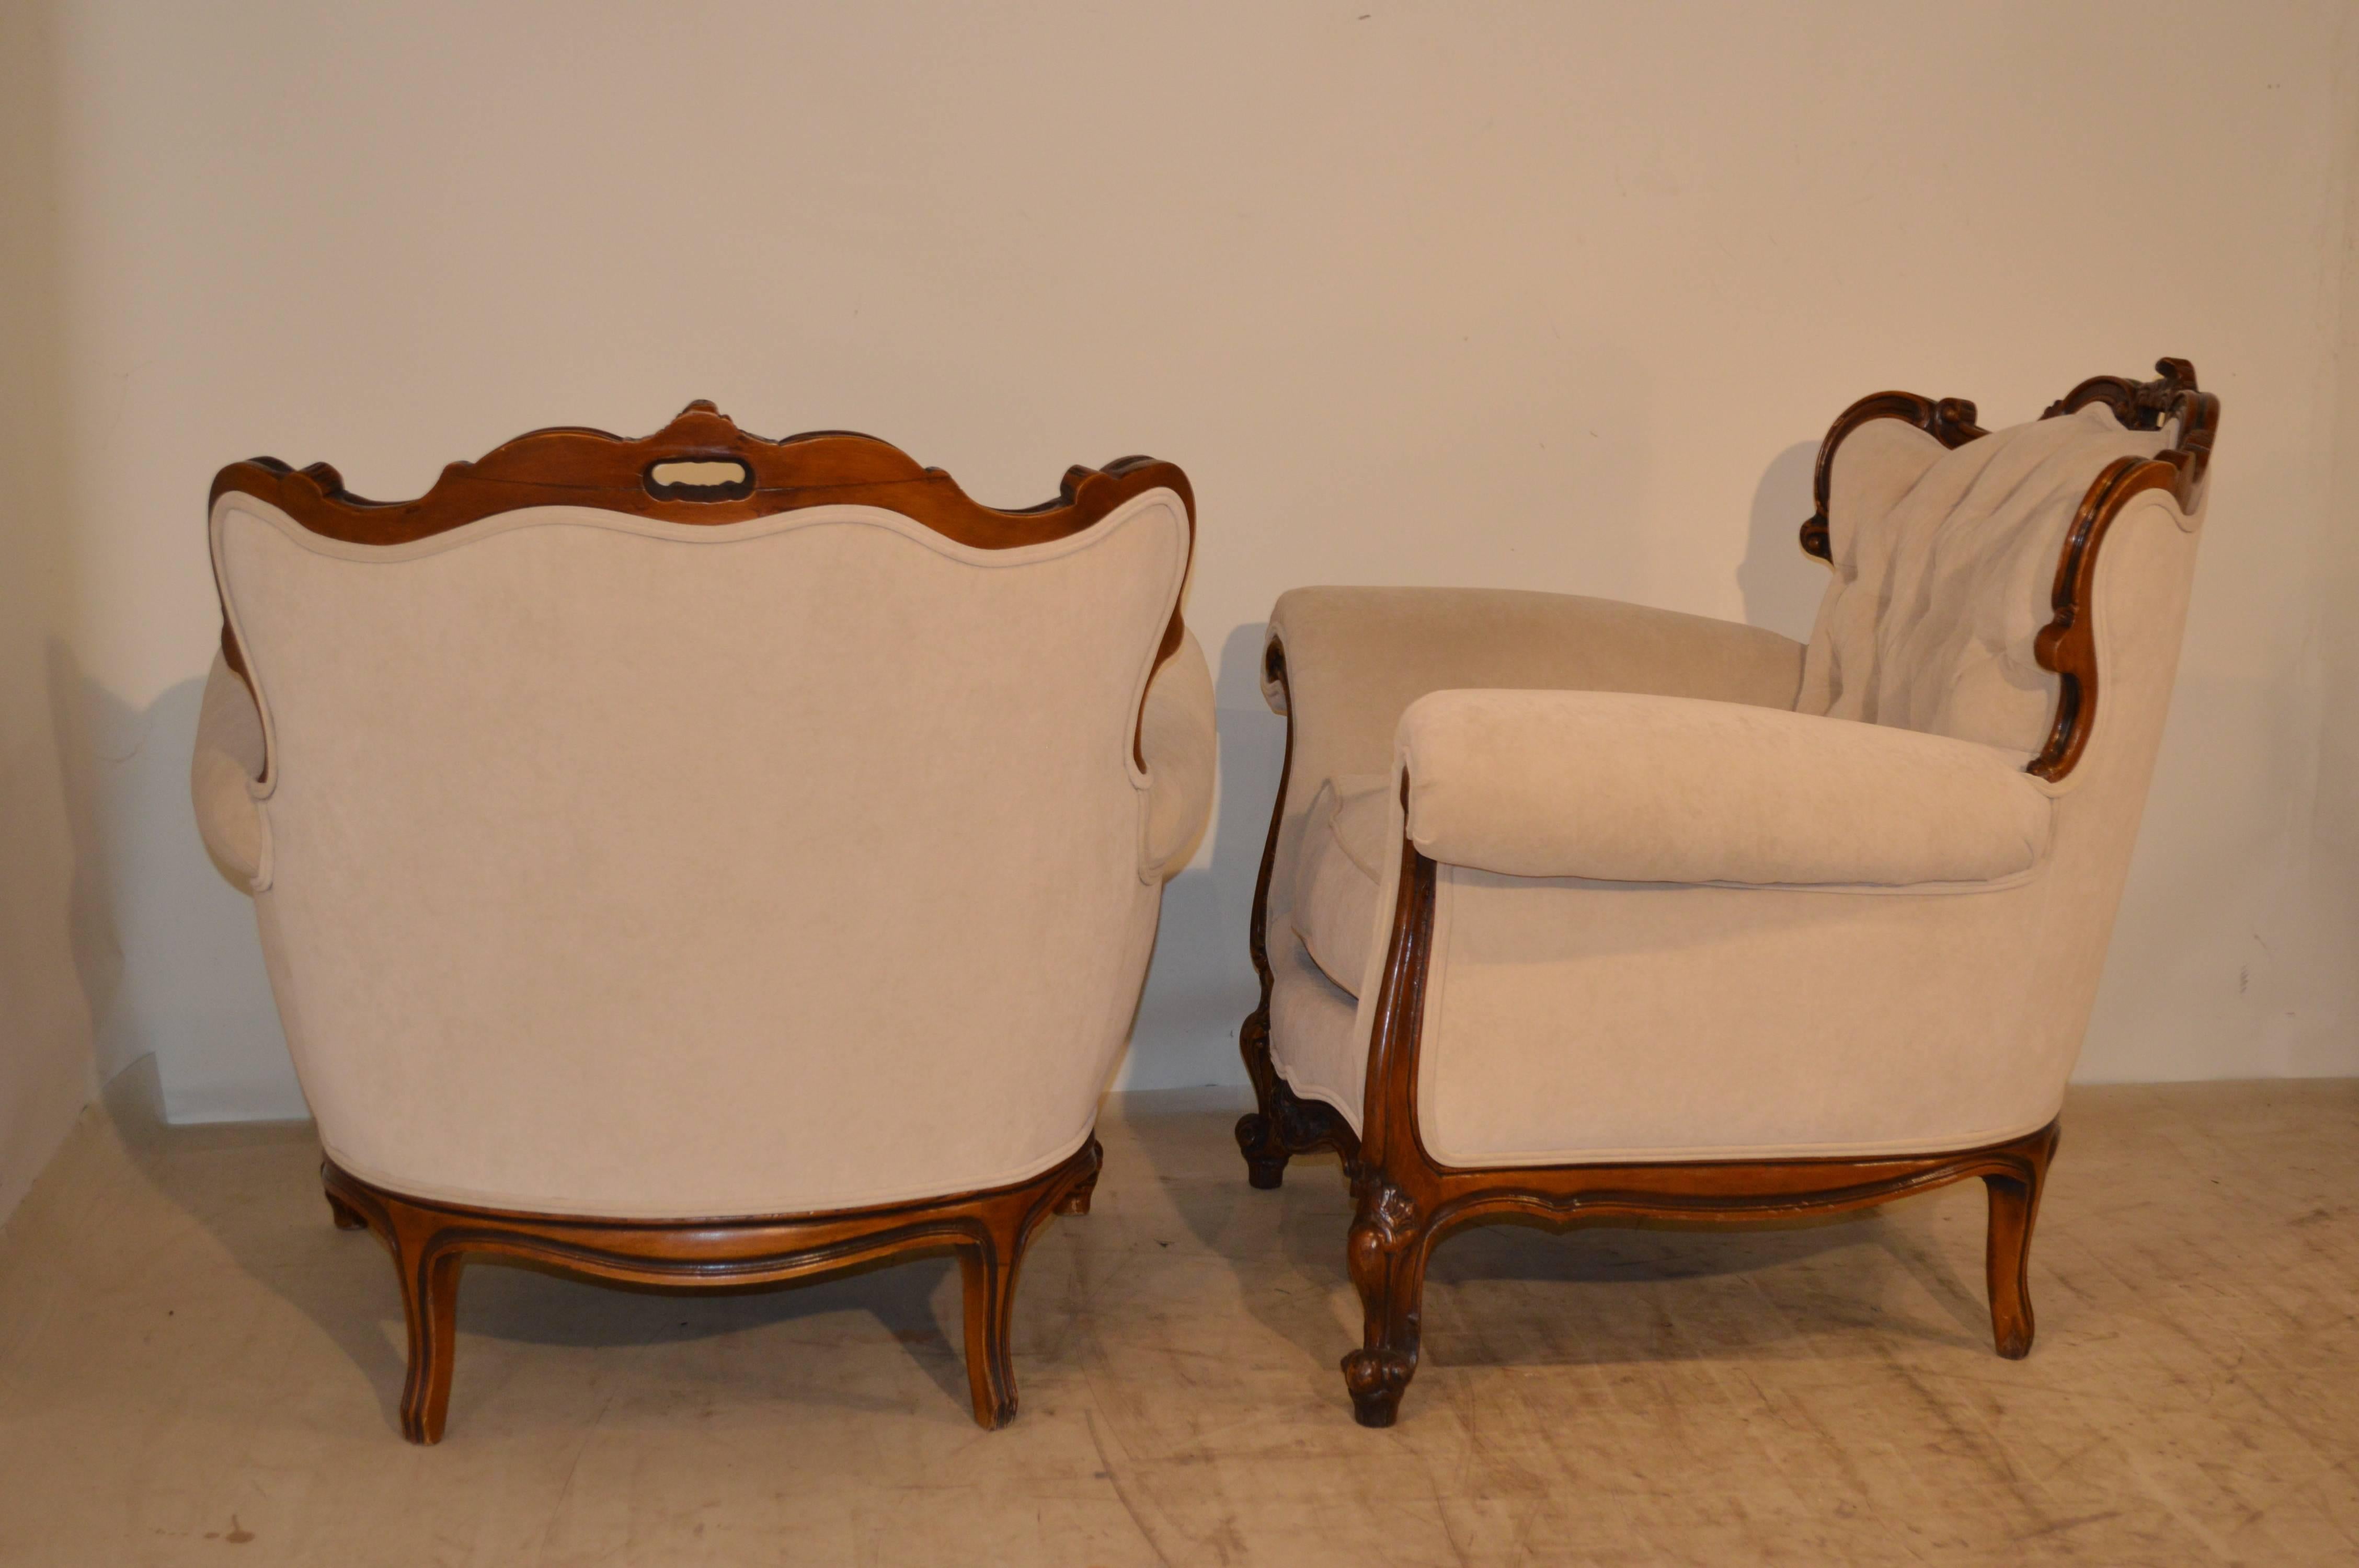 French Three-Piece Tufted Parlor Set, circa 1930